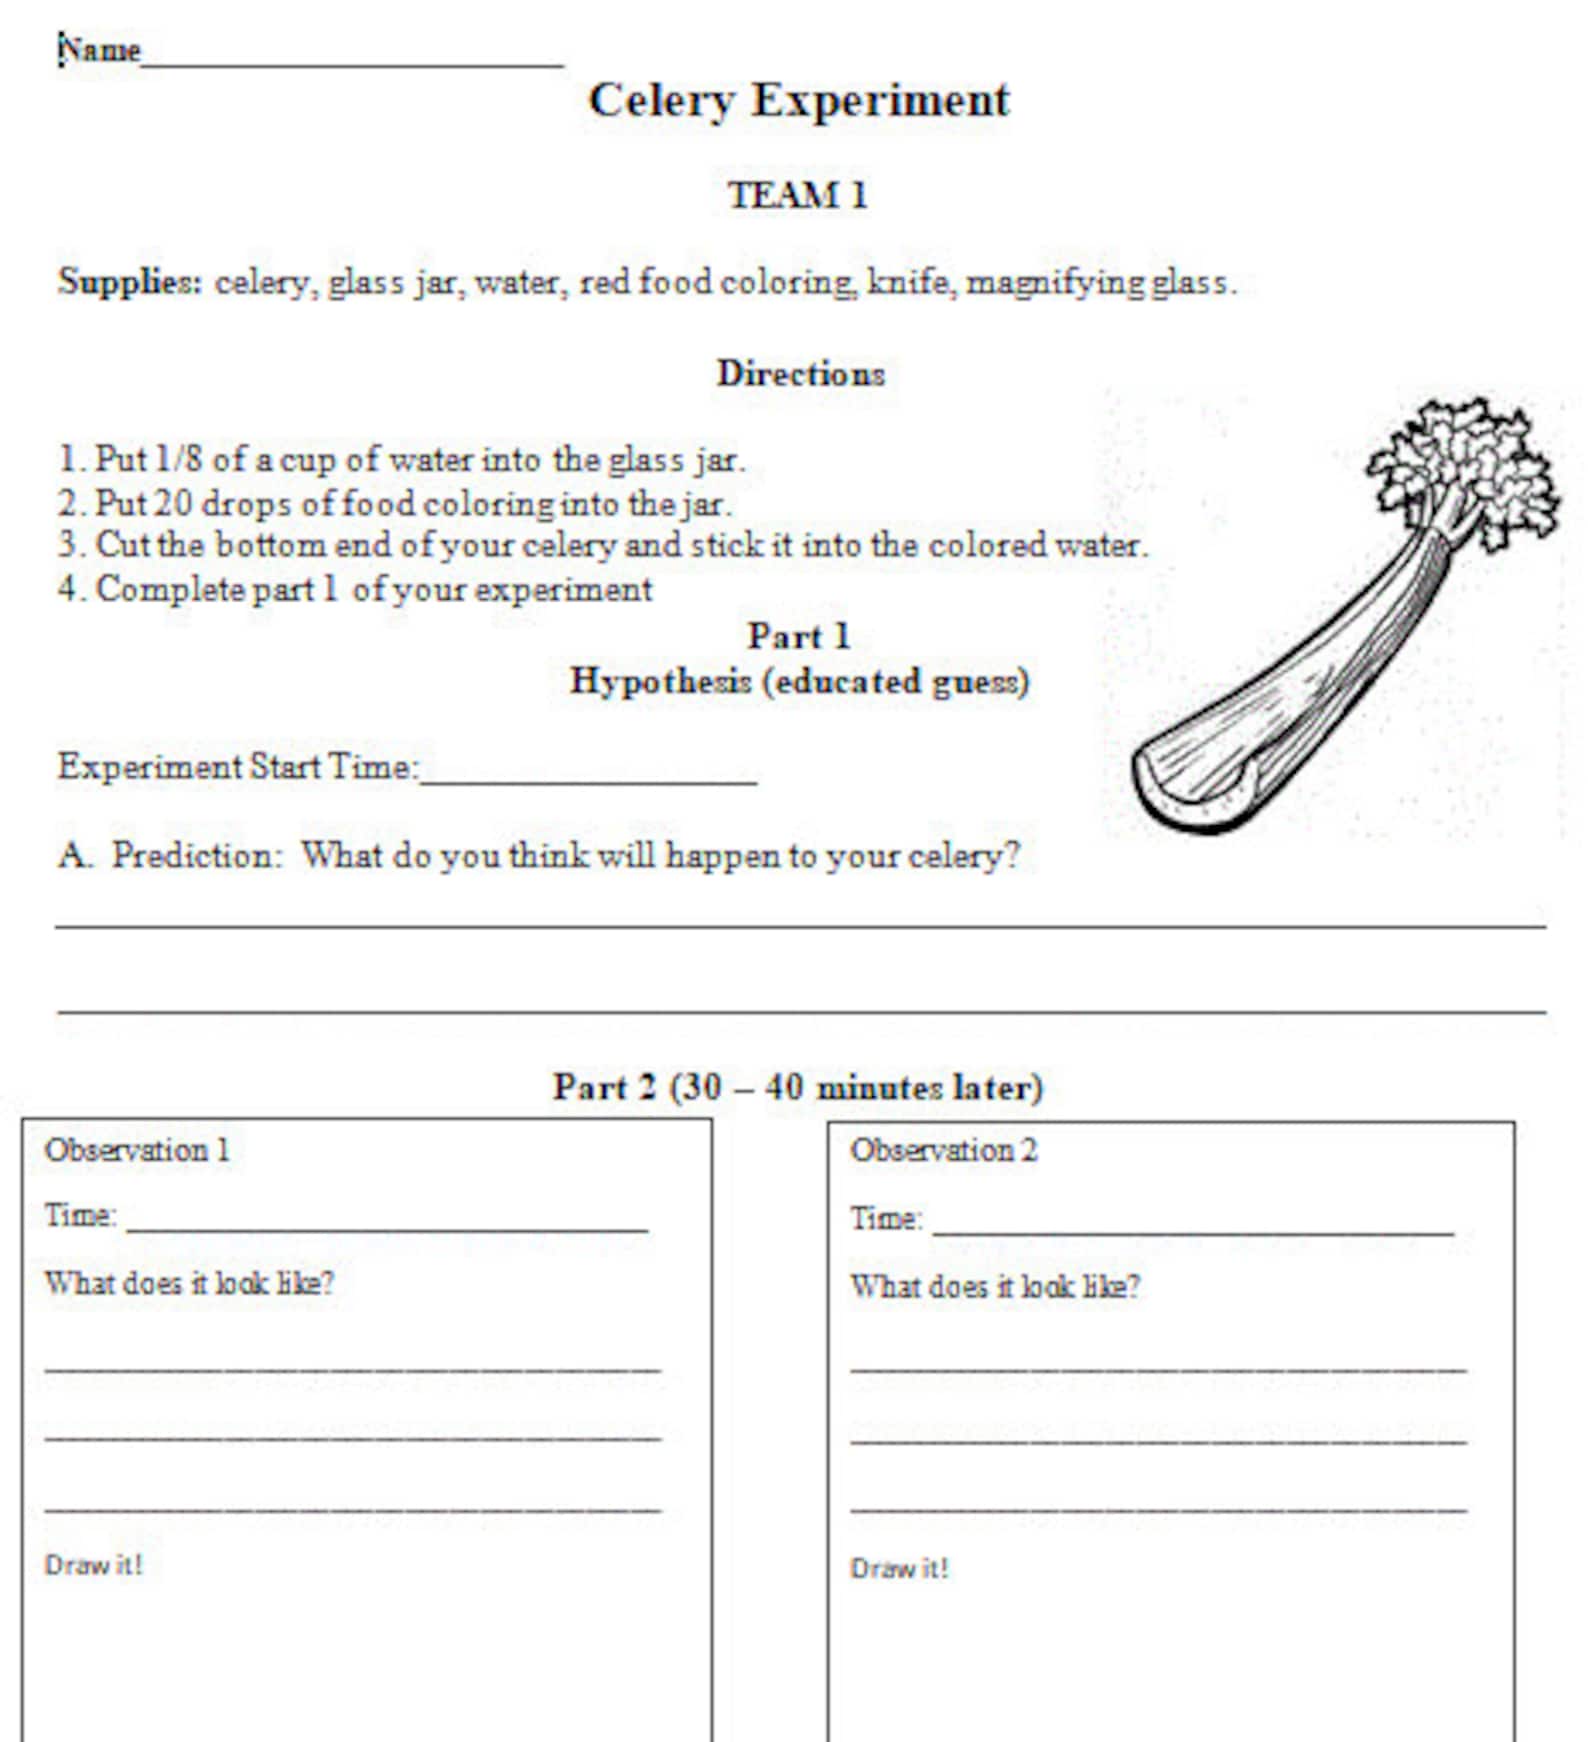 celery-experiment-worksheet-groups-or-individual-etsy